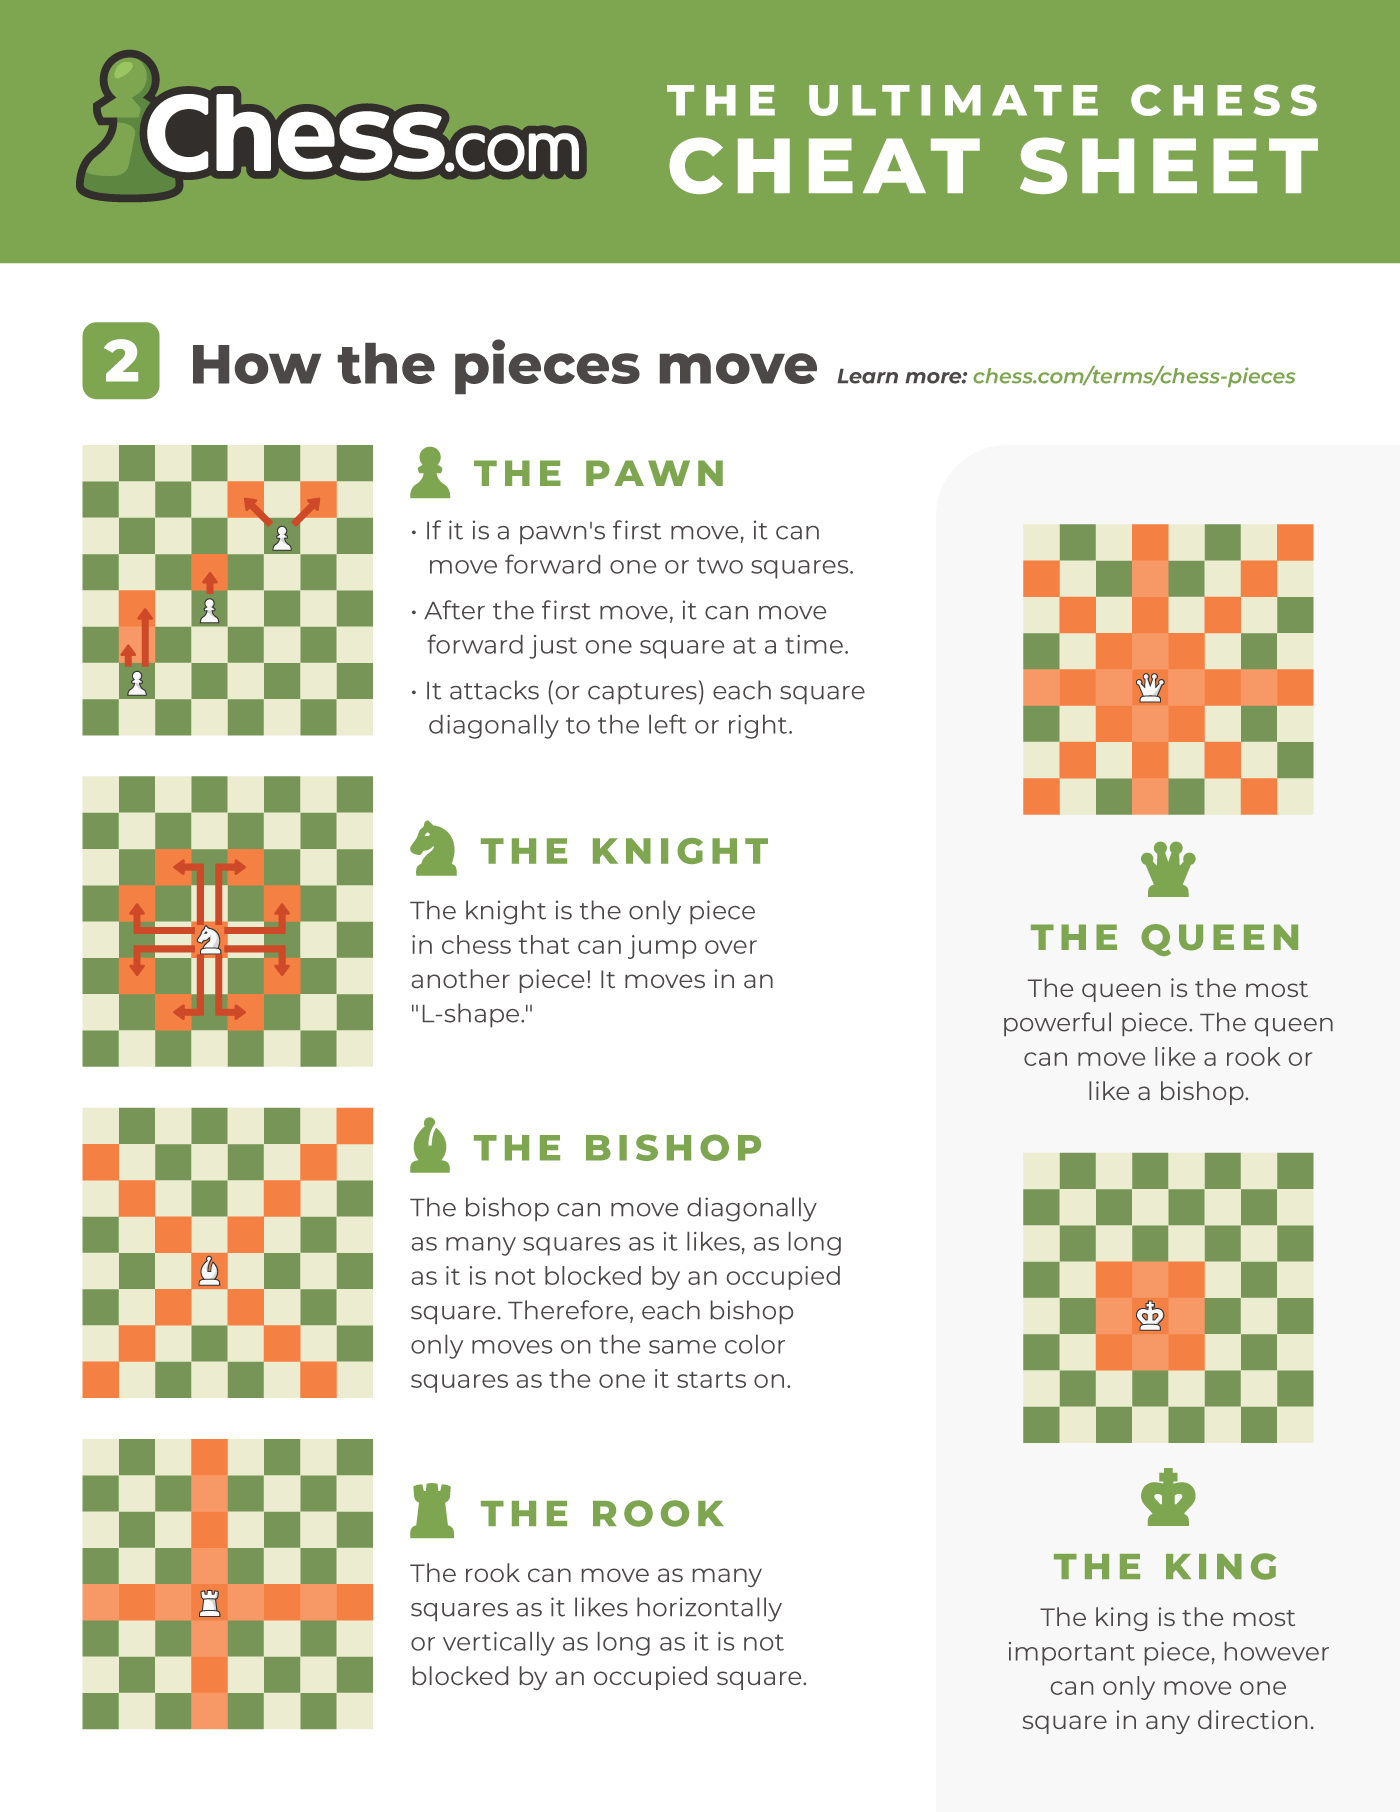 chess-cheat-sheet-images-pdfs-free-to-download-chess